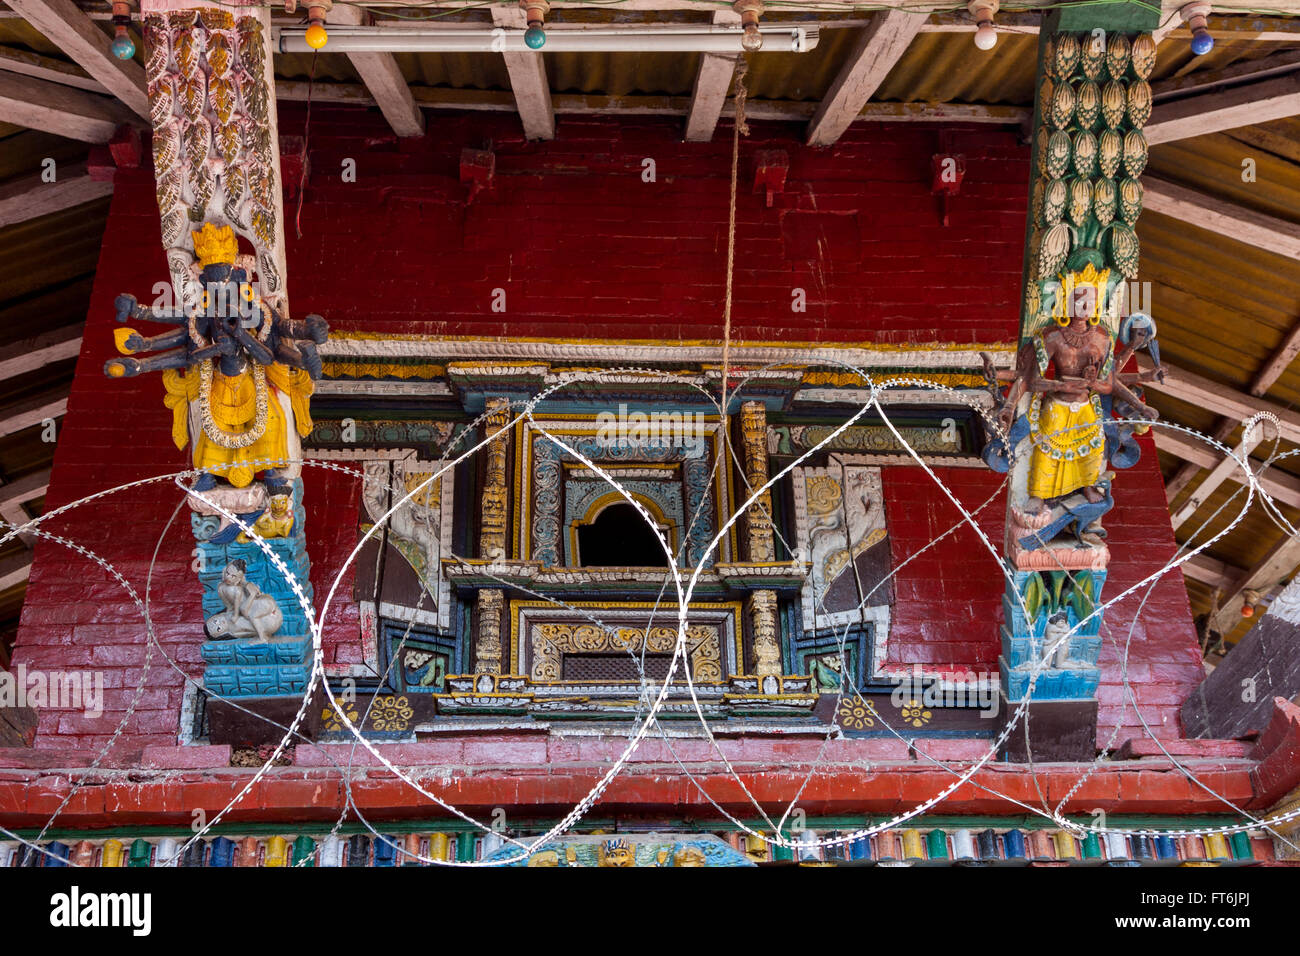 Nepal, Kathmandu.  Temple Carvings Dedicated to Shiva and Parvati, Razor Wire to Prevent Theft. Stock Photo